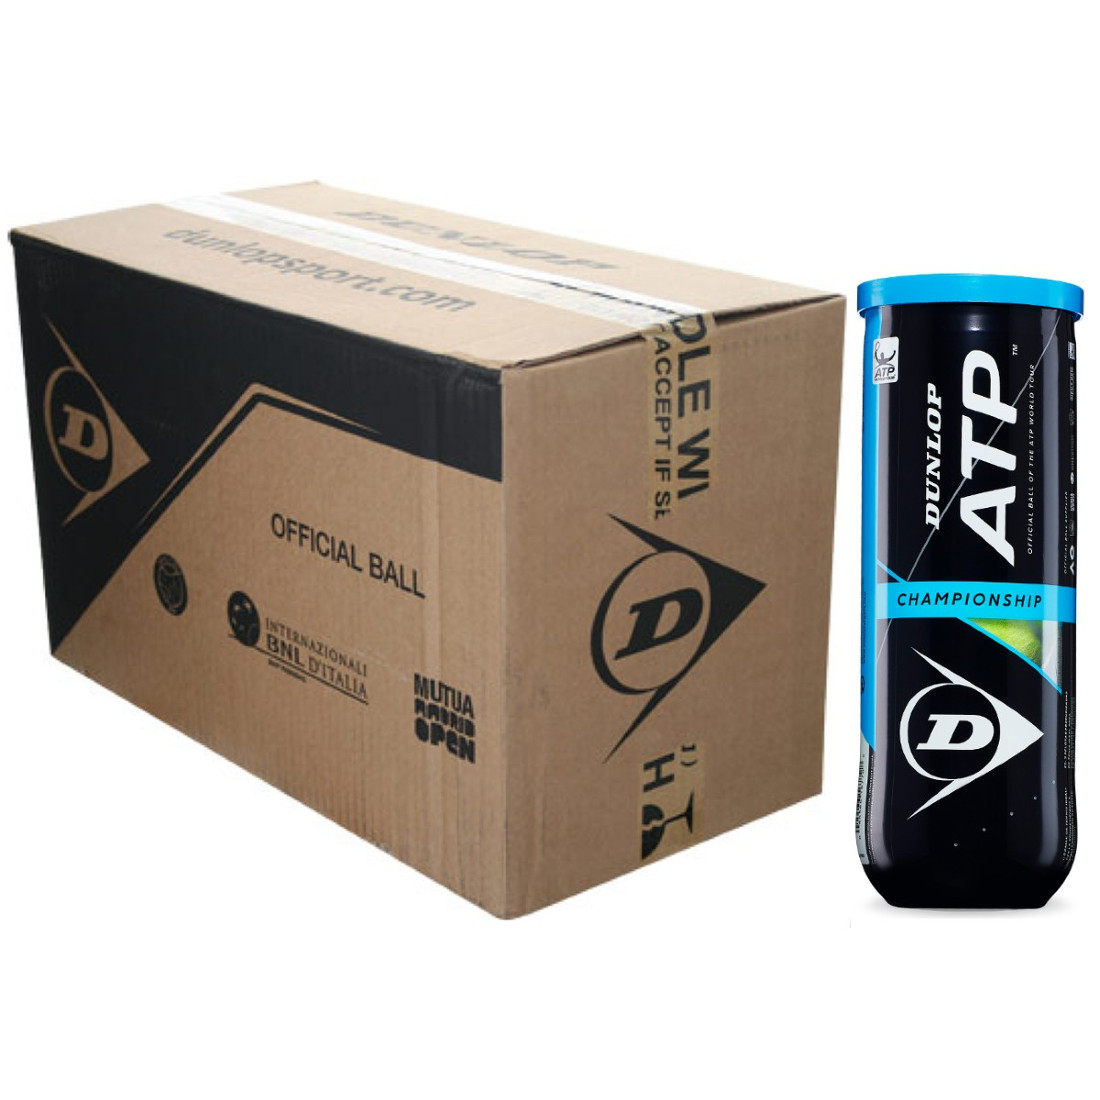 DUNLOP ATP Championship case of 24 cans of 3 balls